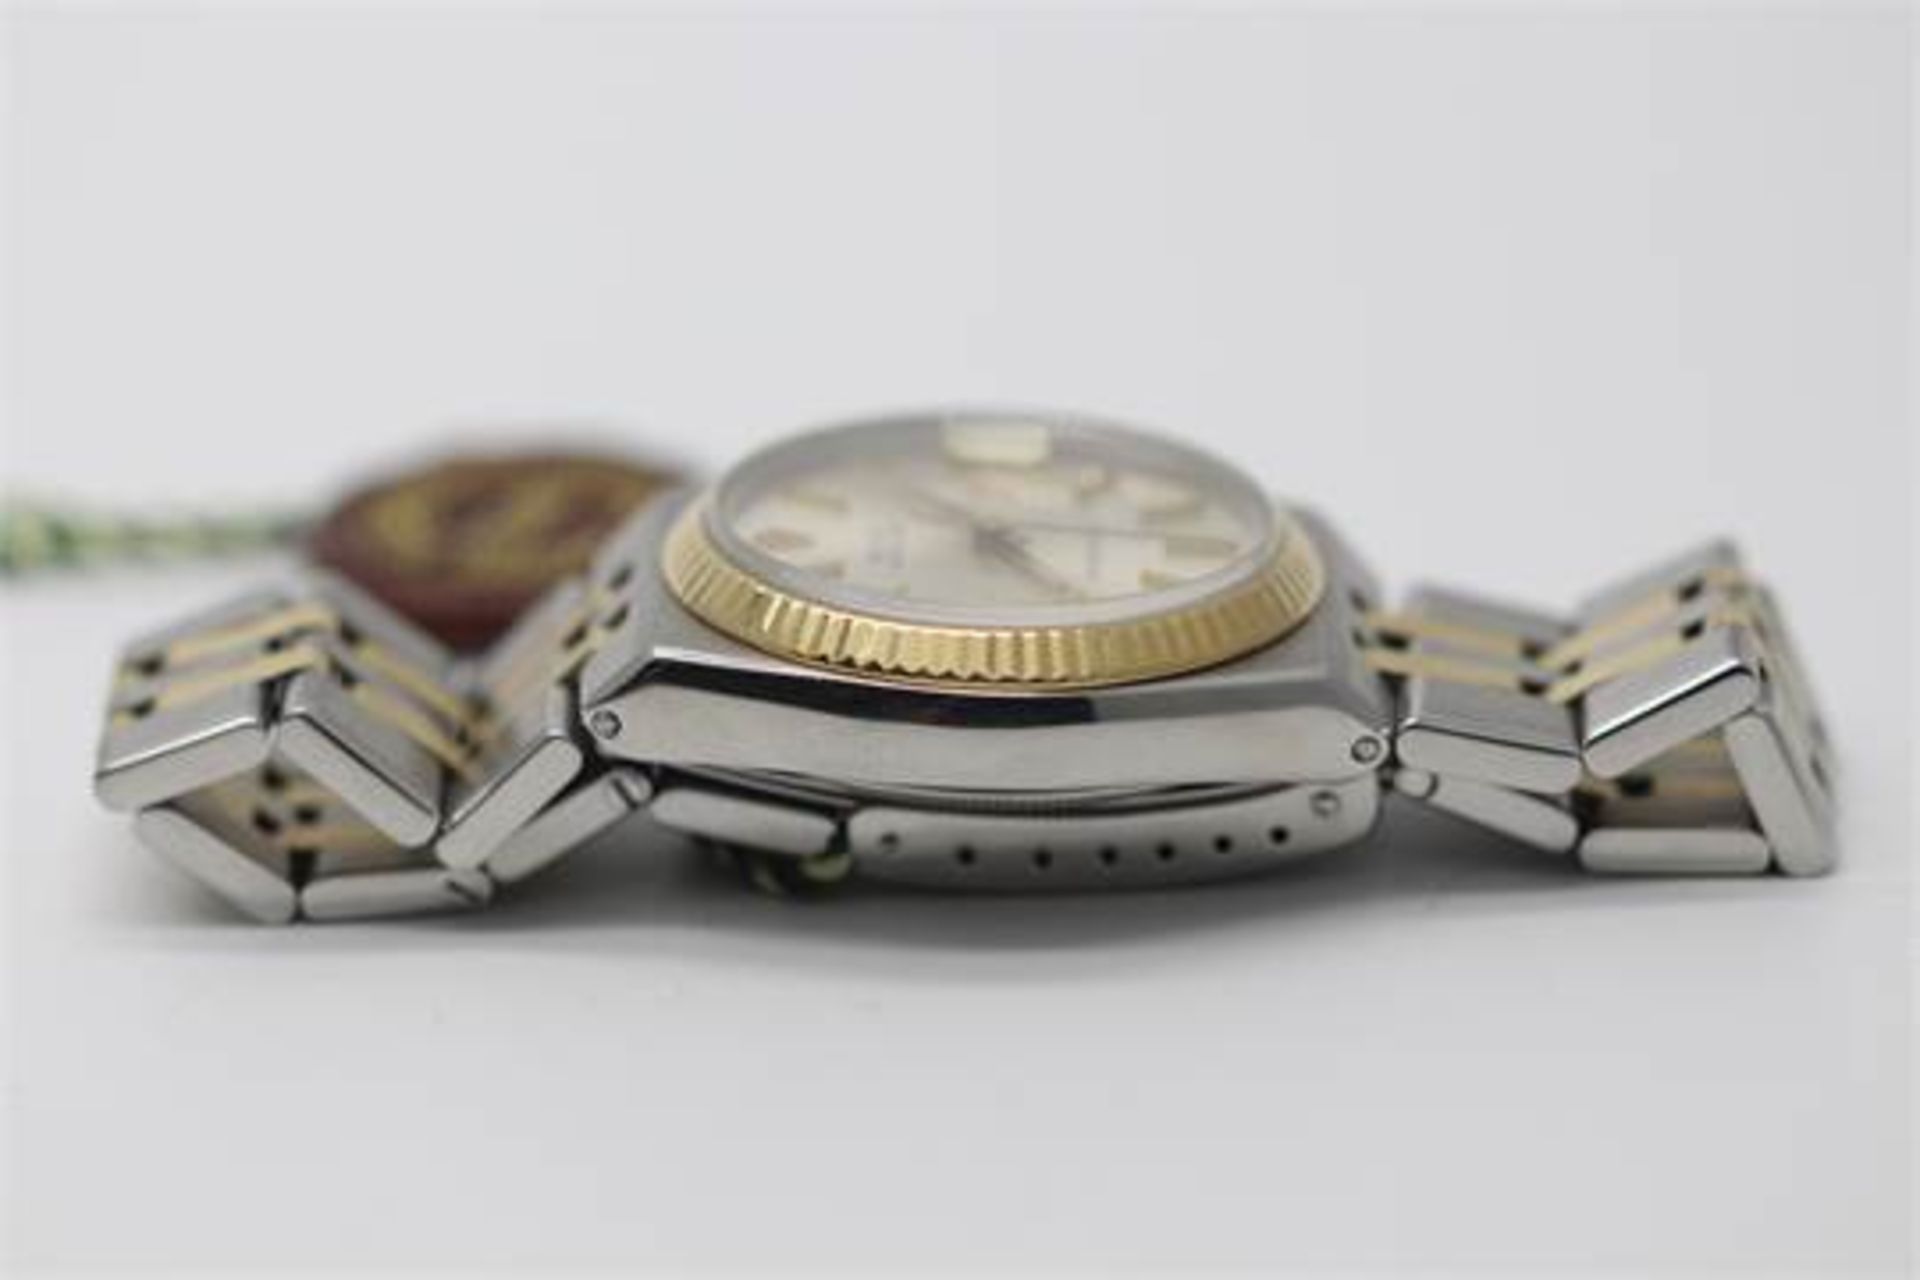 VINTAGE ROLEX OYSTER QUARTZ, STAINLESS STEEL AND 18CT YELLOW GOLD, 36MM, CHAMPAYNE BATON DIAL, - Image 6 of 6